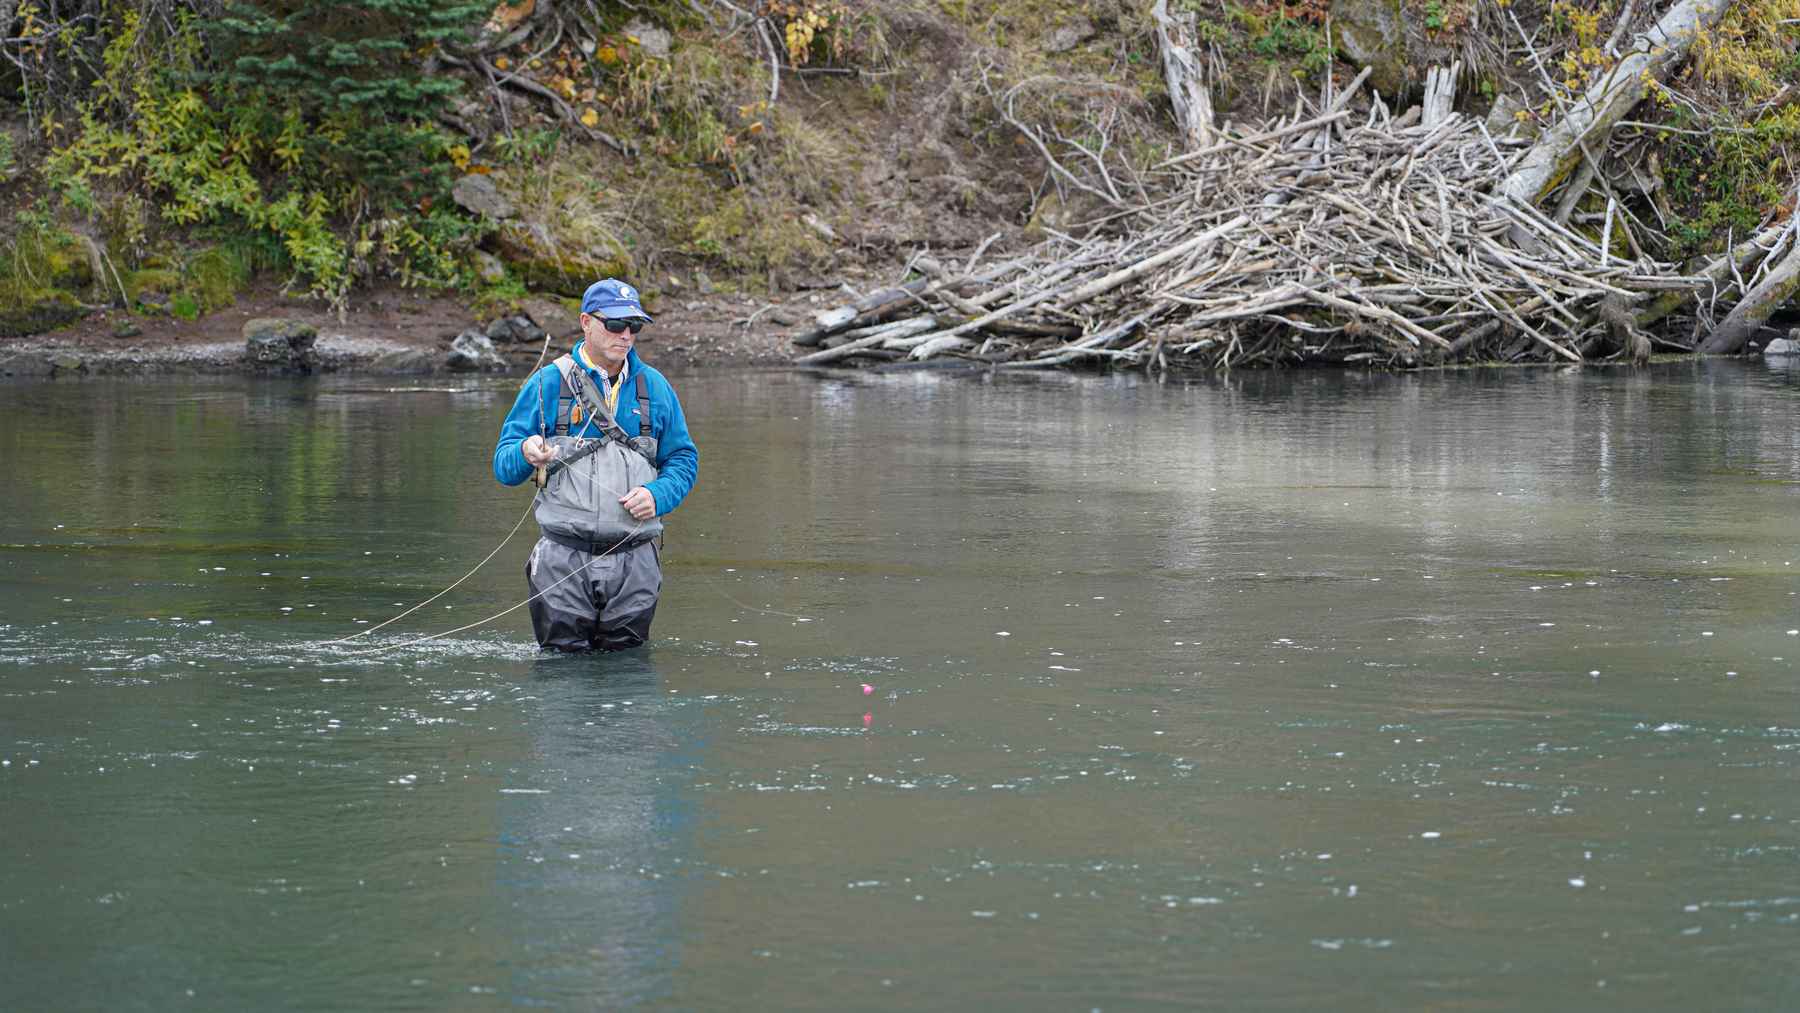 How to Pick Winning Fly Fishing Tippet - Full Guide